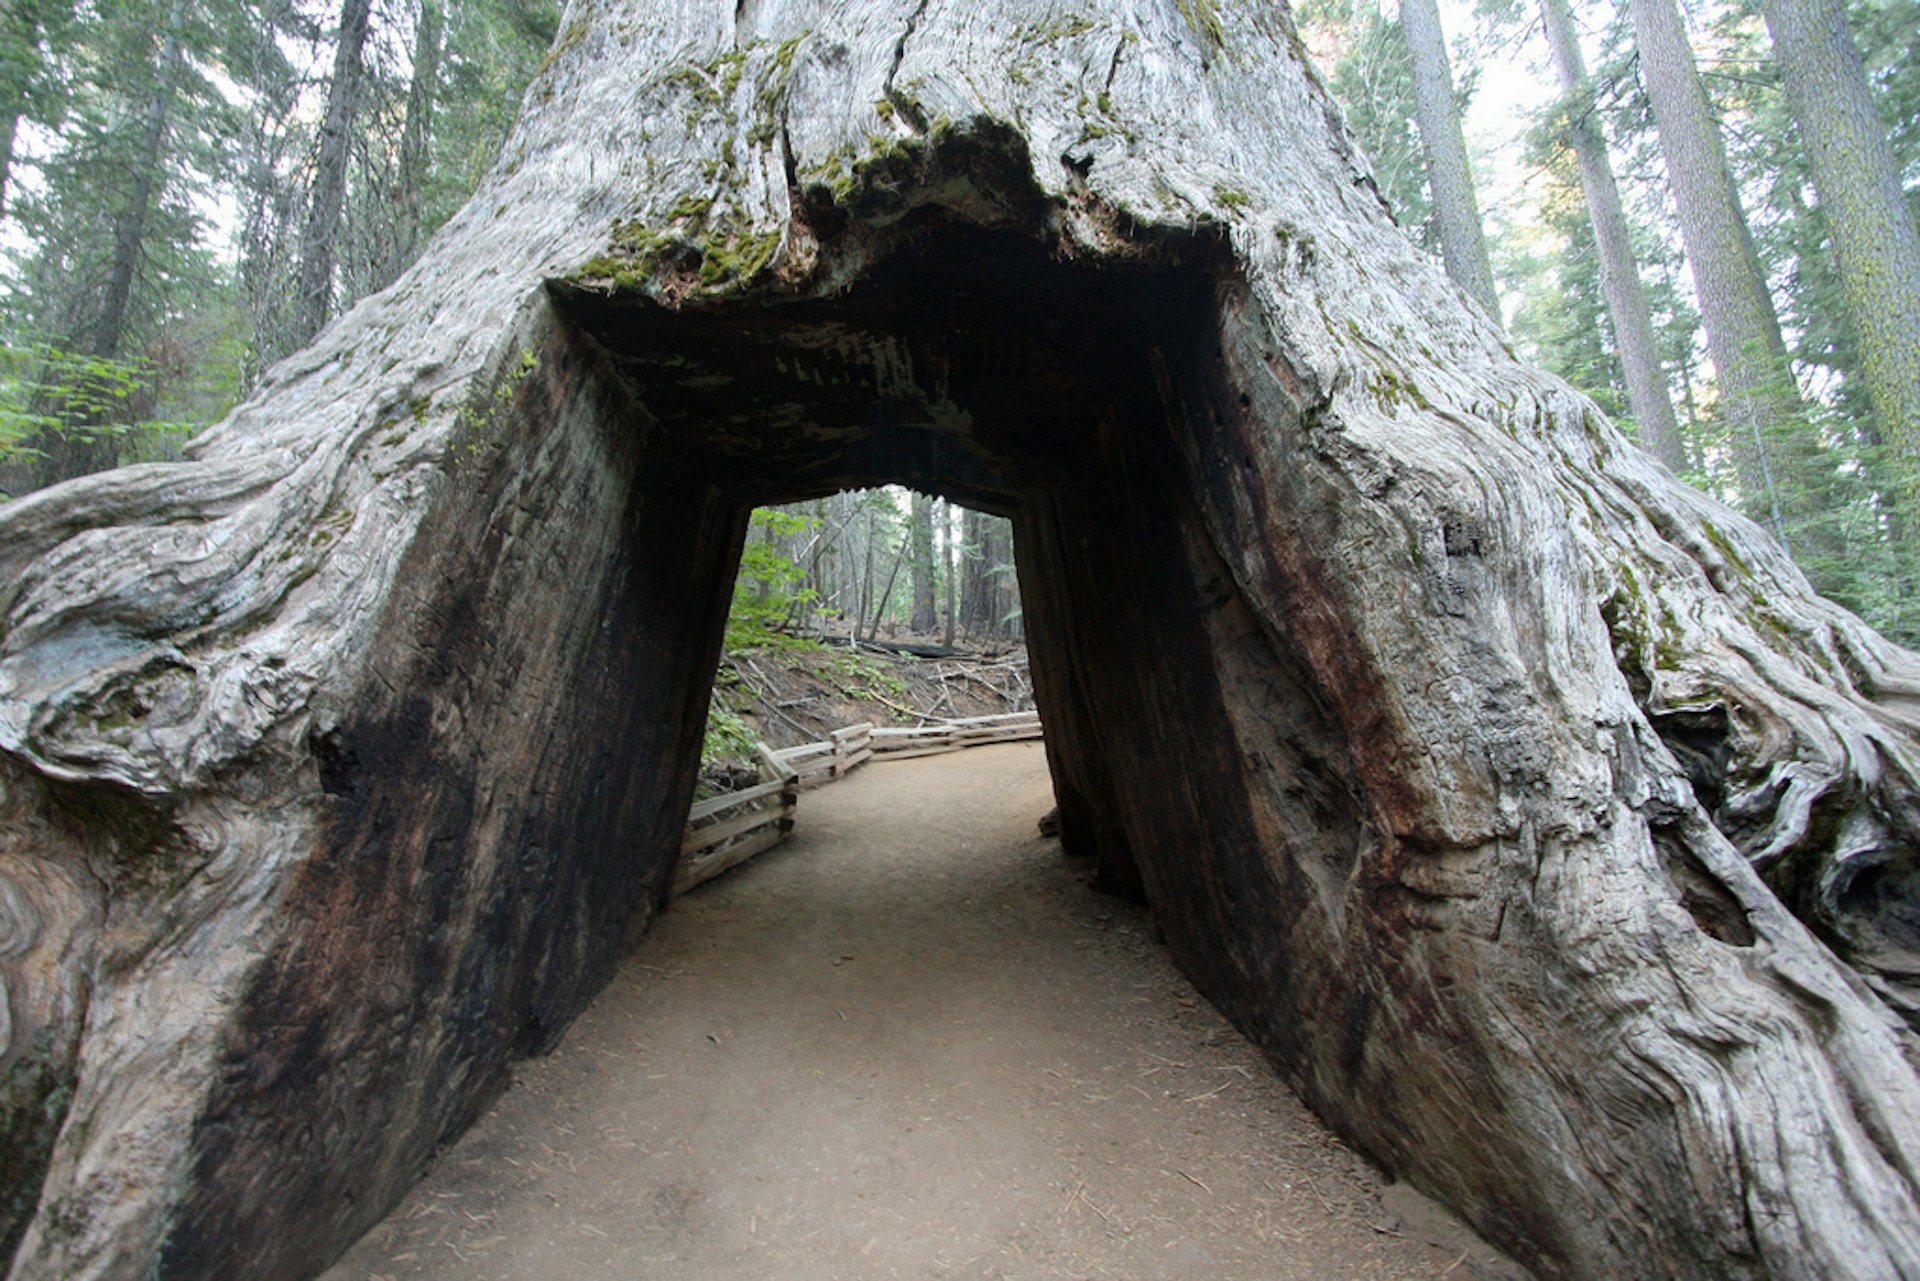 Tunnel tree in Tuolumne Grove. Image by Ronnie Macdonald / CC BY 2.0